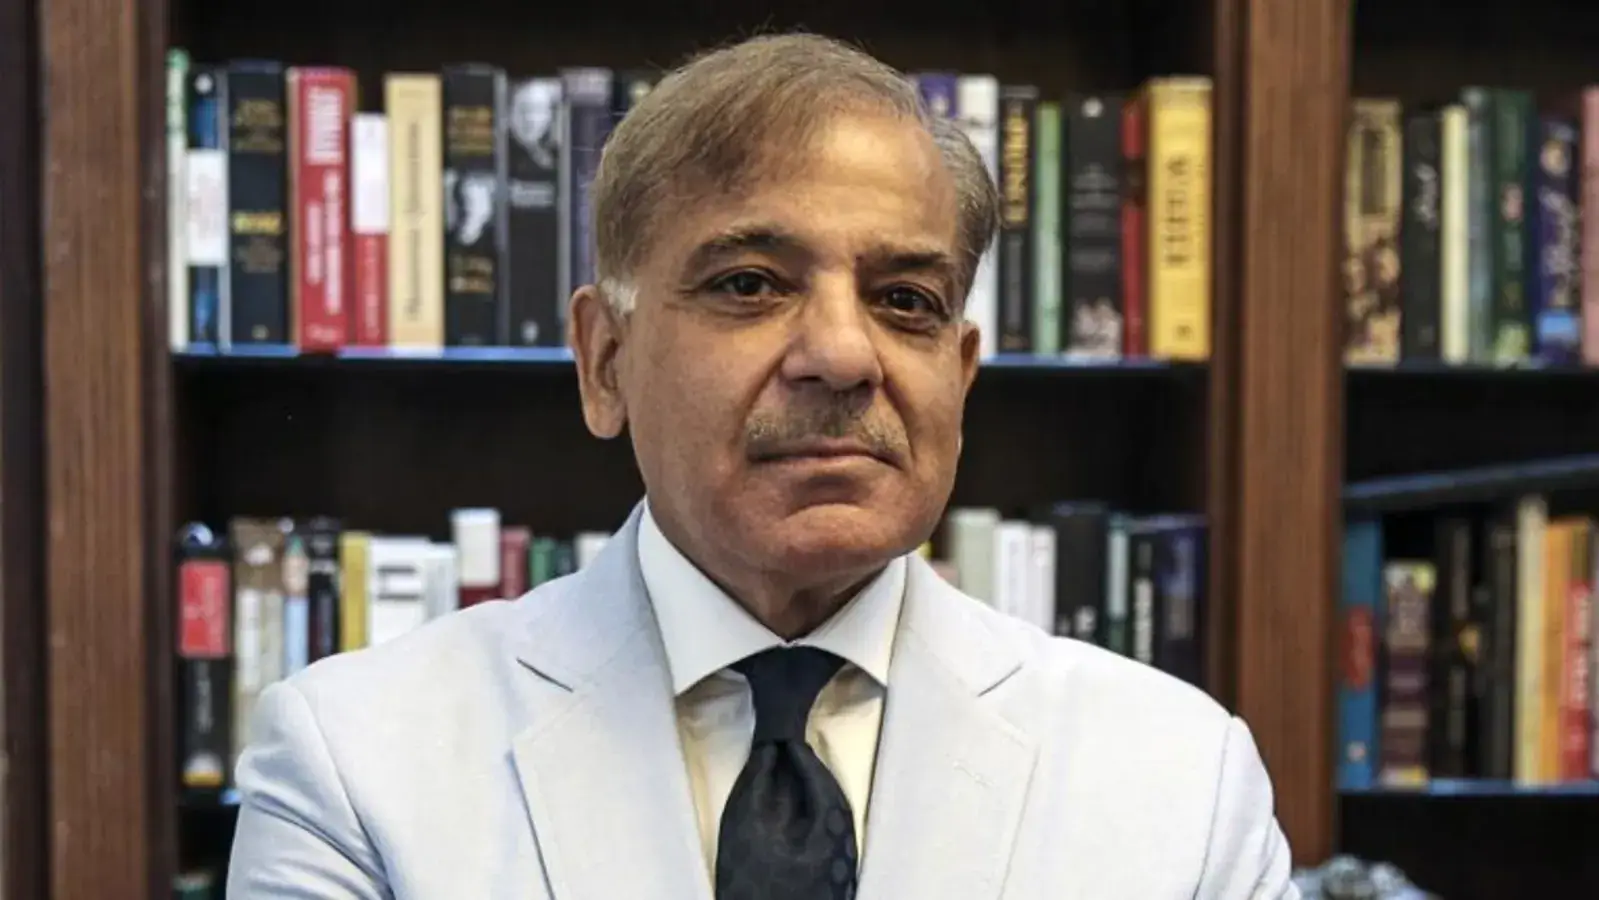 Shehbaz Sharif poised to become next Prime Minister of Pakistan